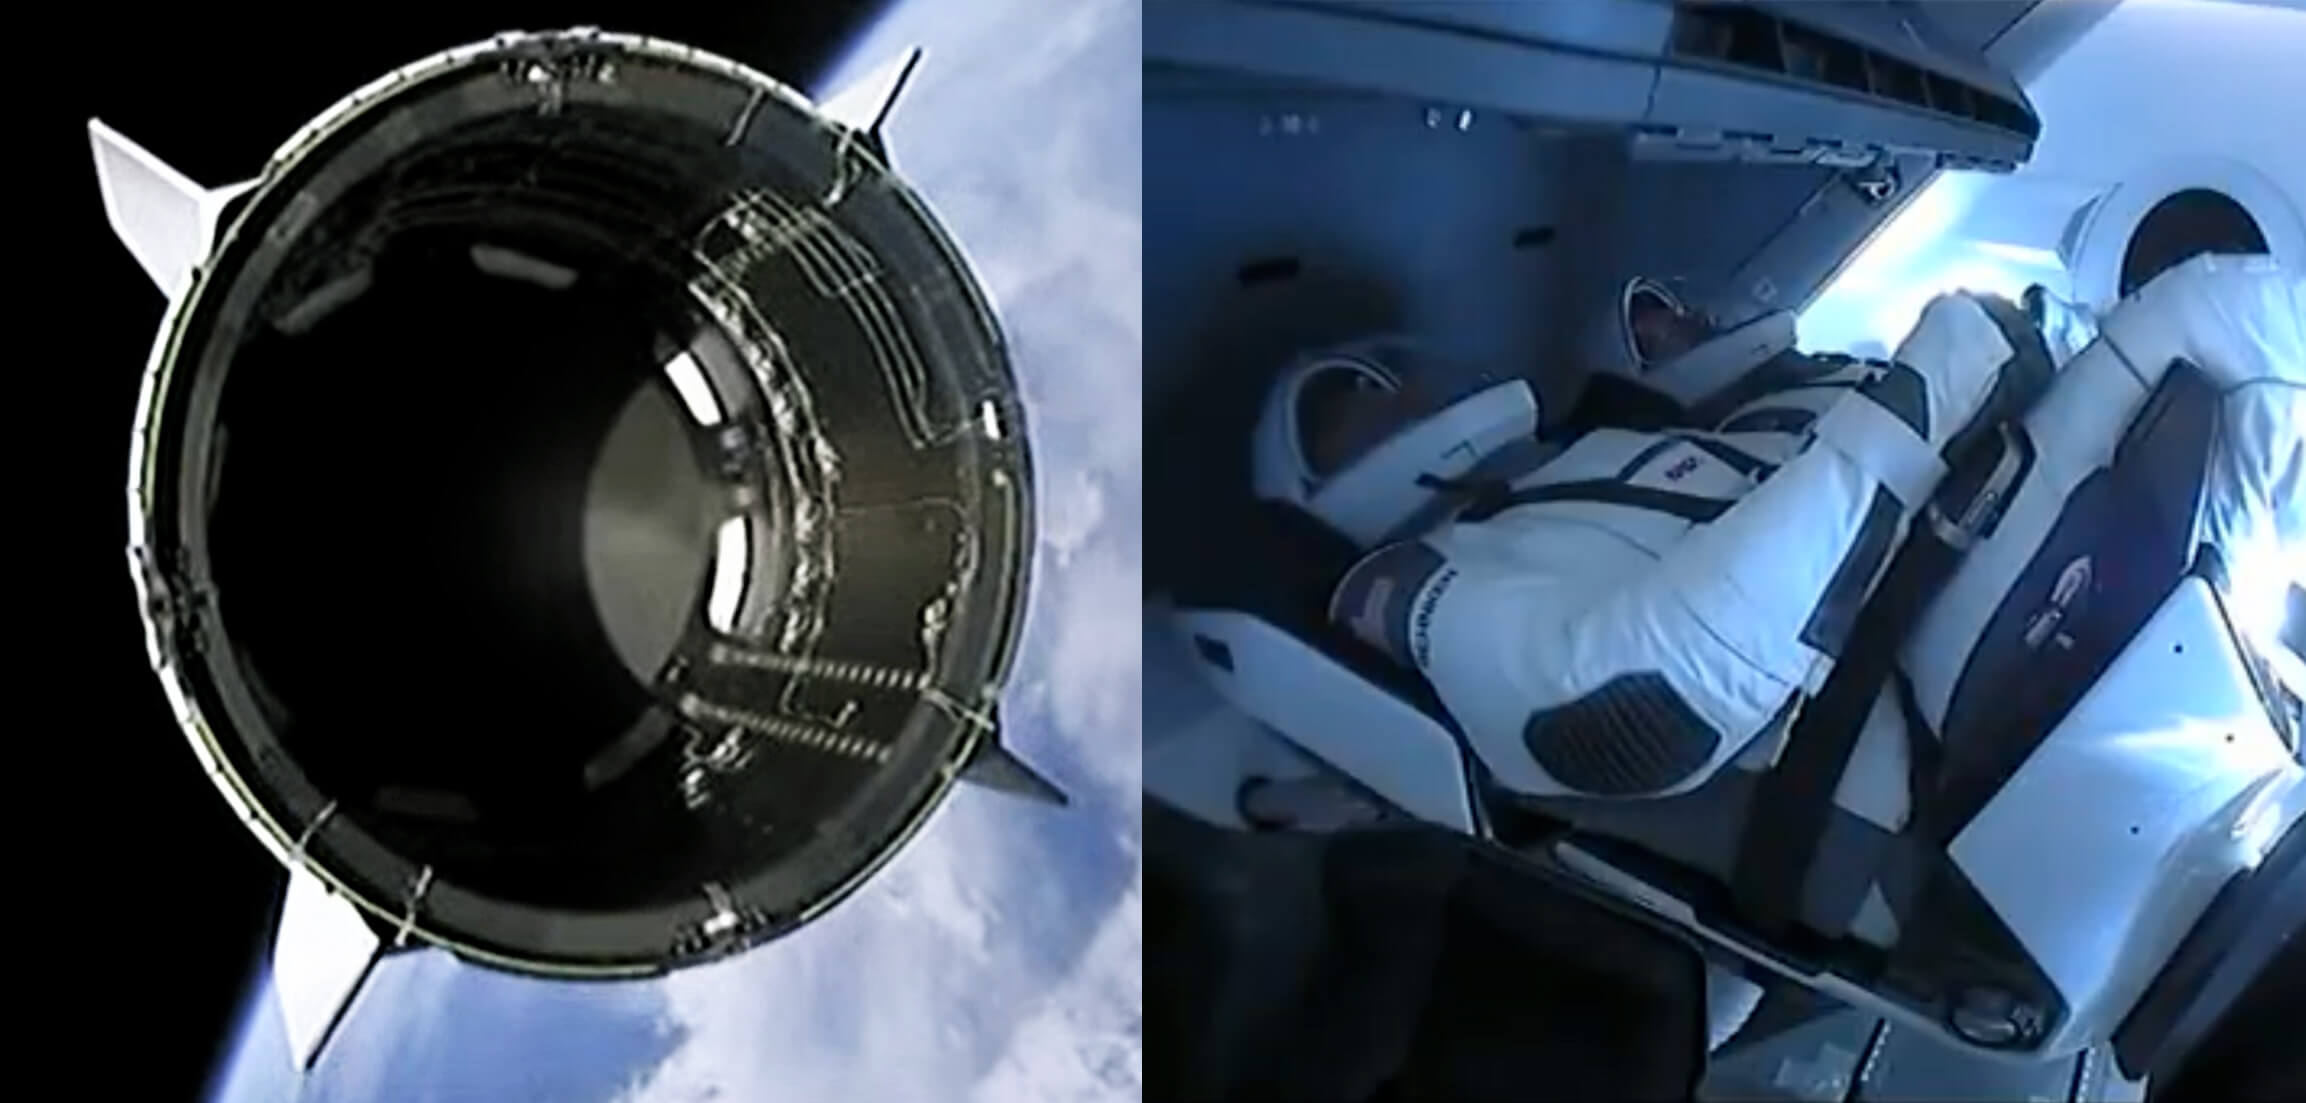 SpaceX launched the Dragon Crew and ship made a successful docking with the ISS